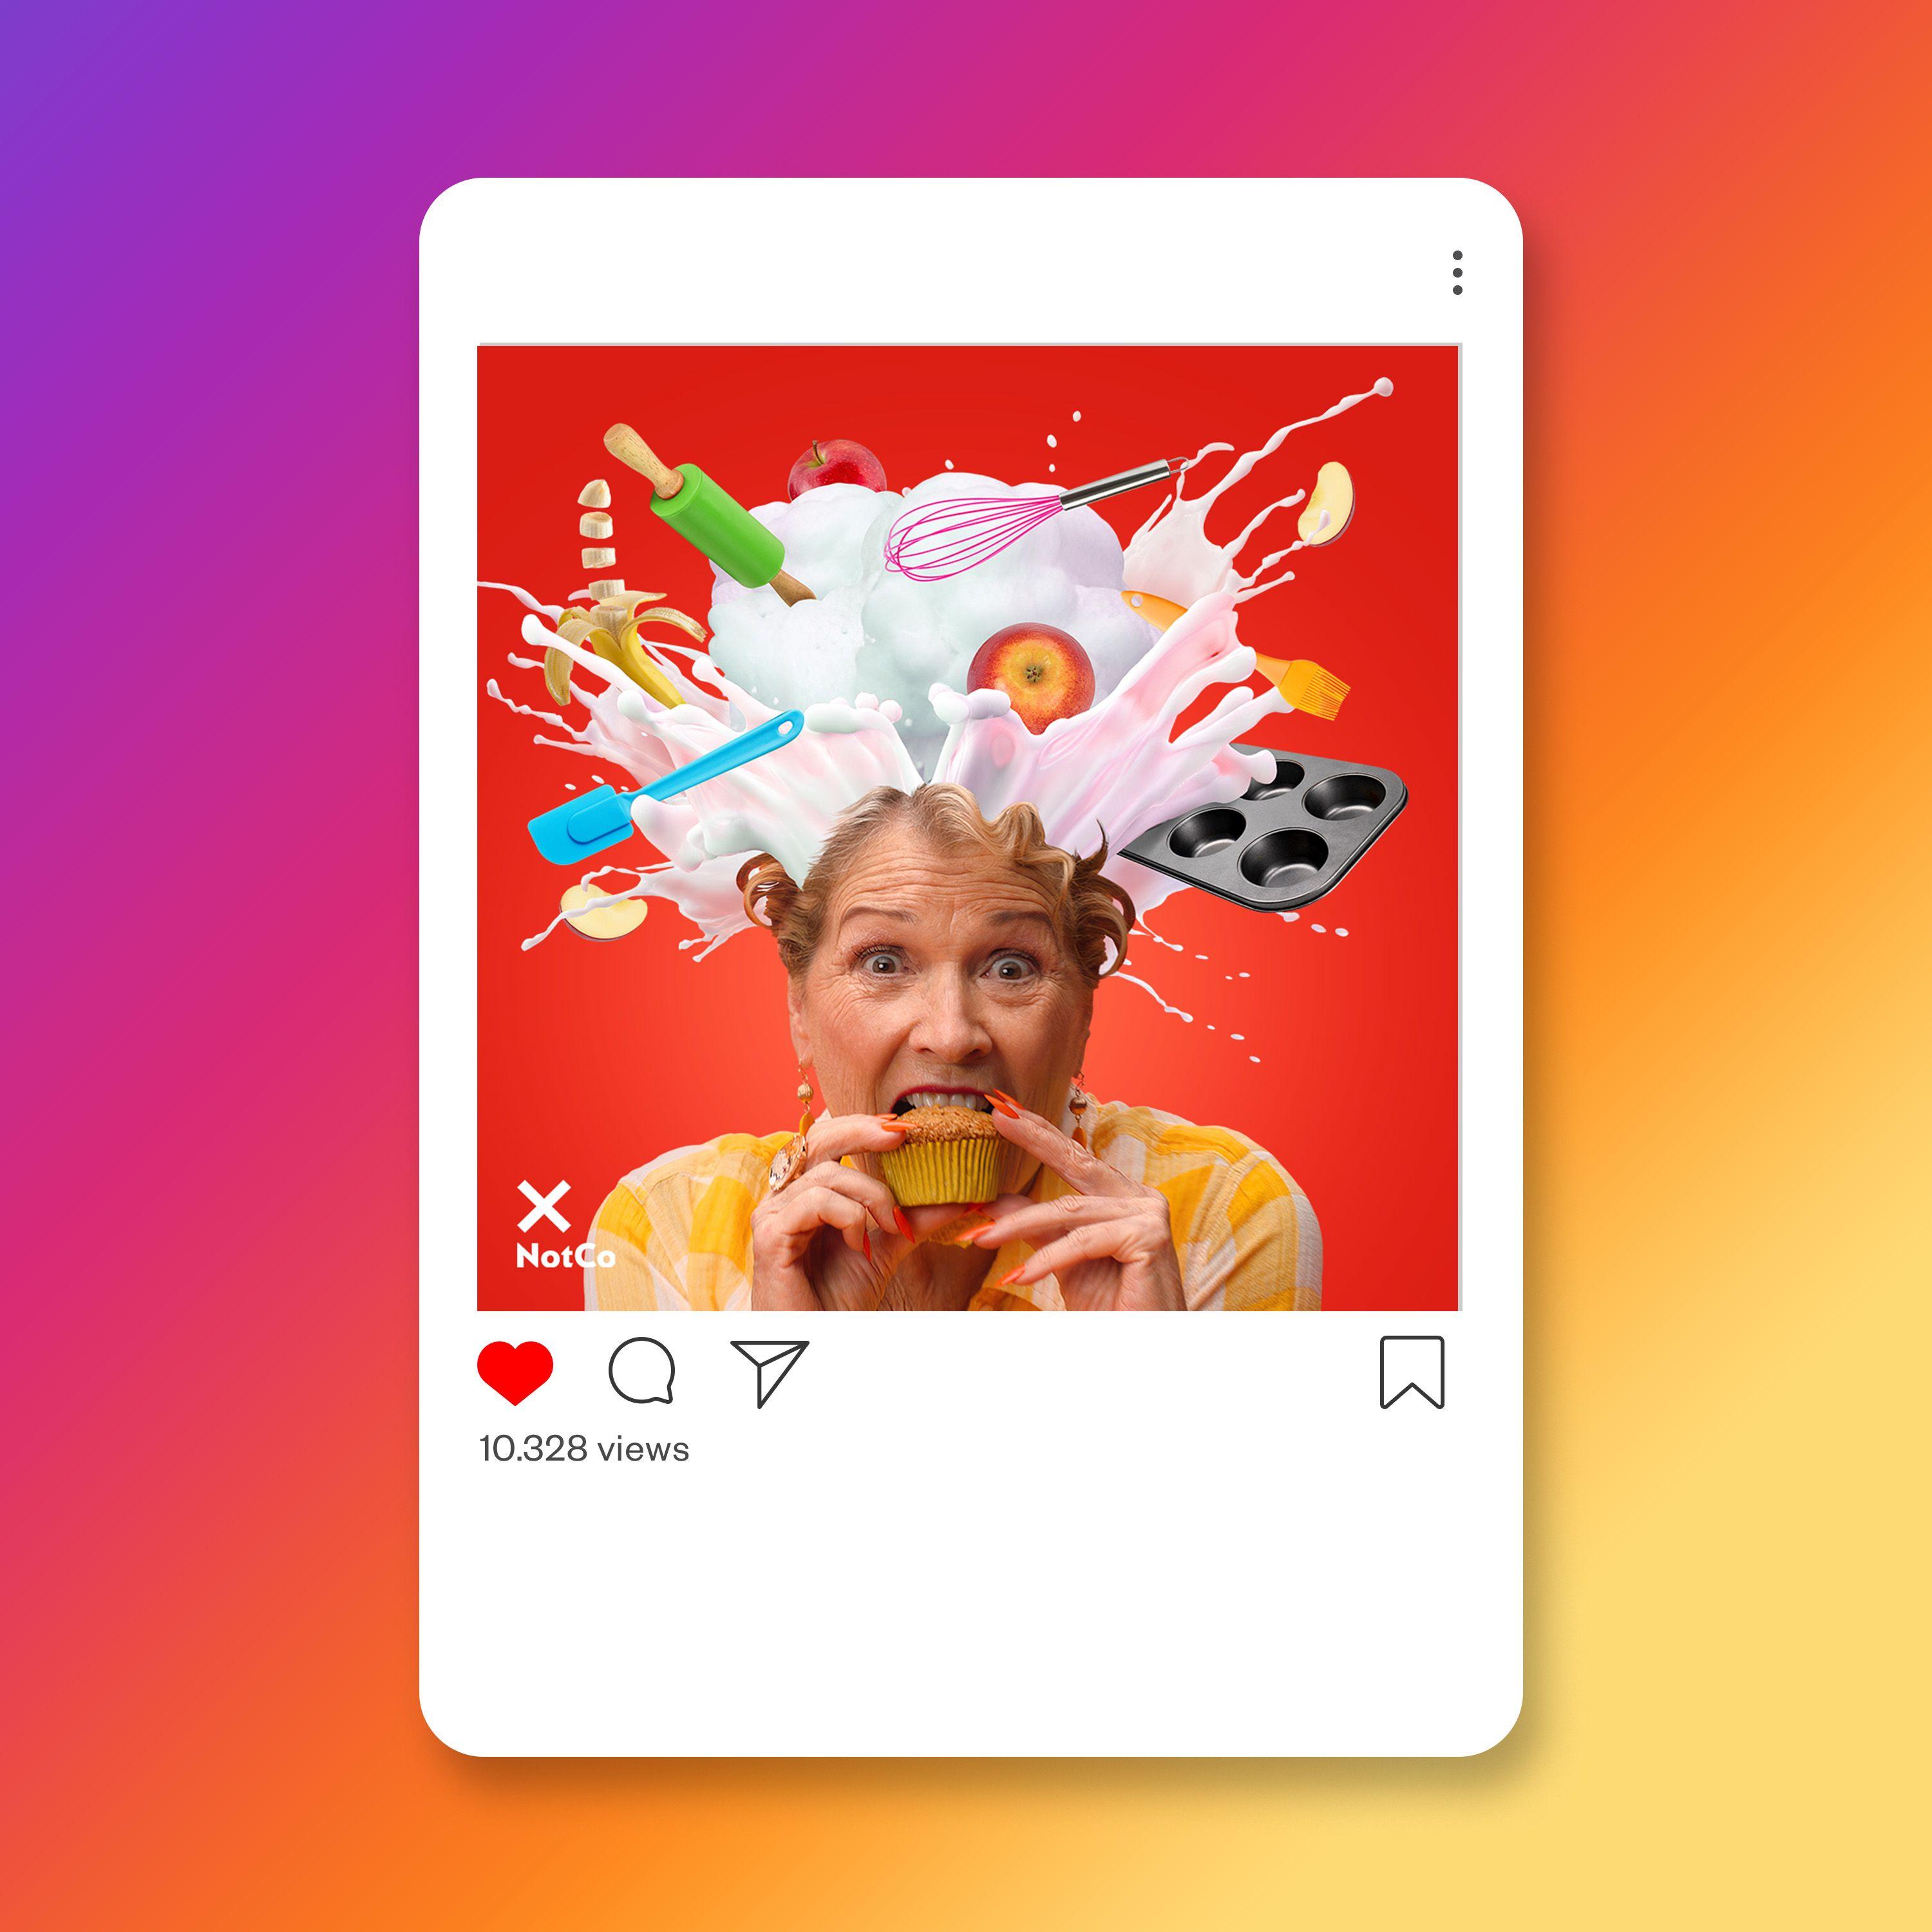 An example of Instagram ad for NotMilk showing mind-blowned people eating products with NotMilk